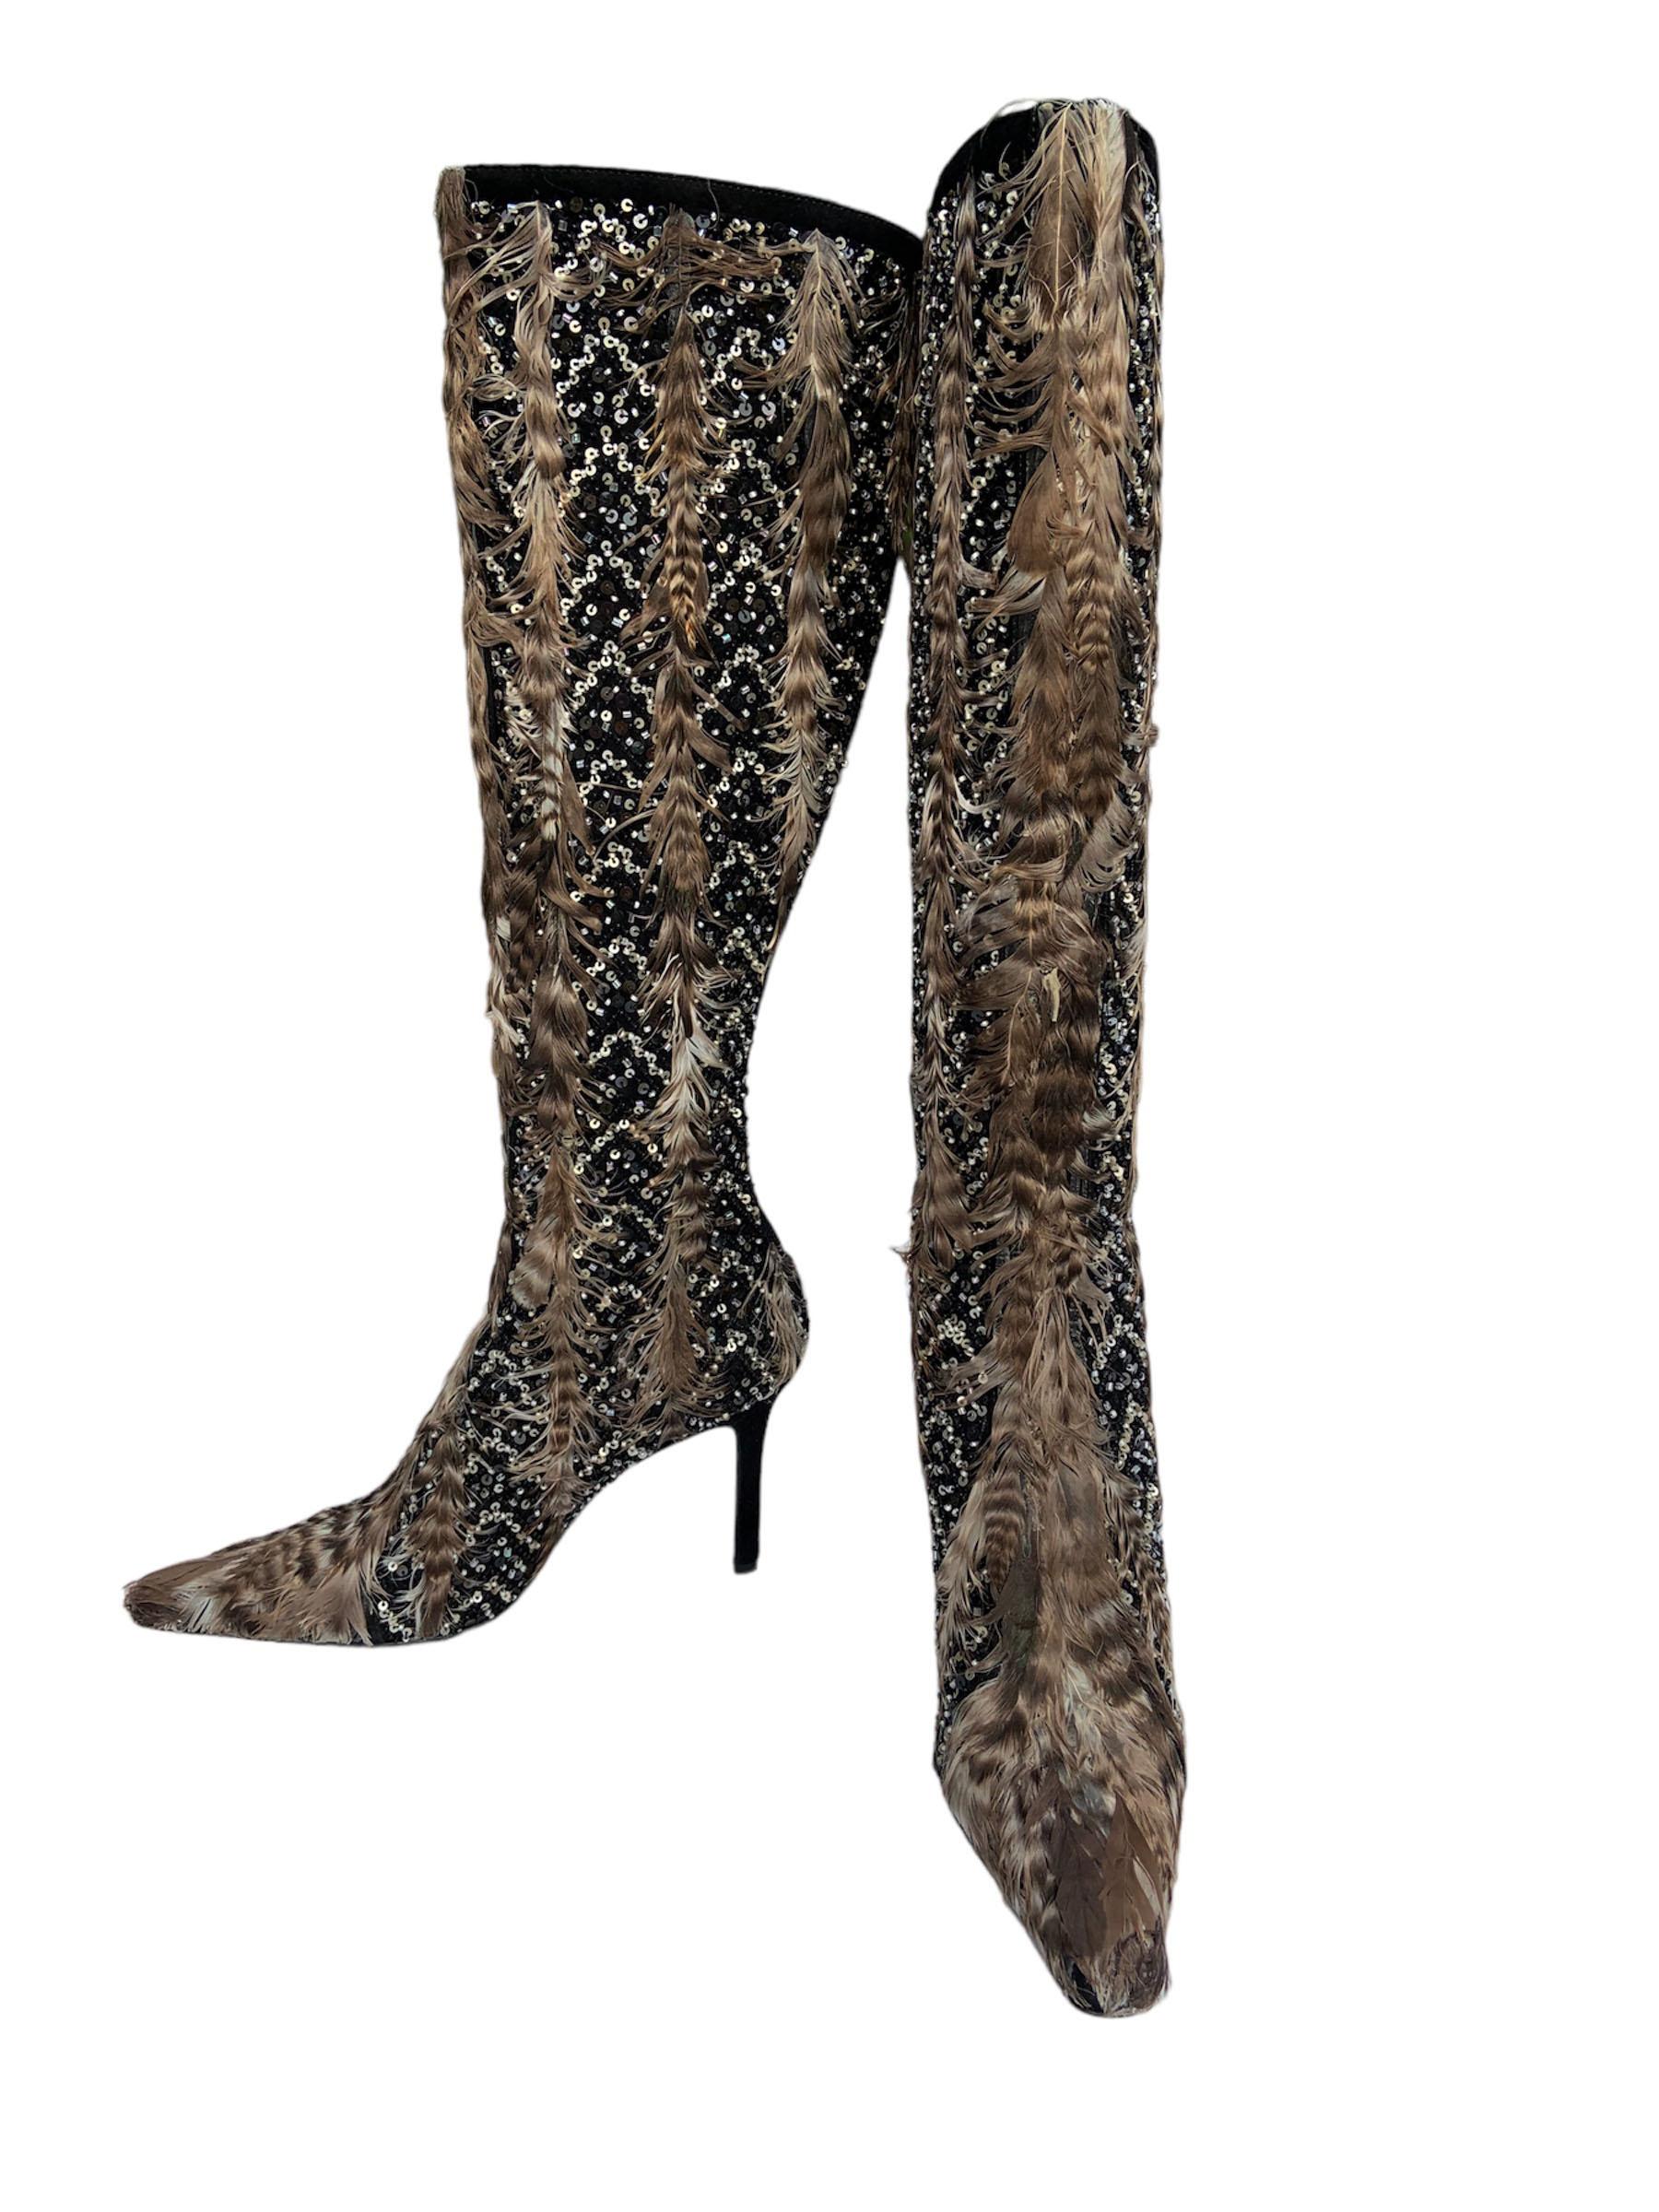 New Oscar de la Renta Fully Beaded Feather Embellished Knee Boots It 36.5 US 6.5 In New Condition For Sale In Montgomery, TX